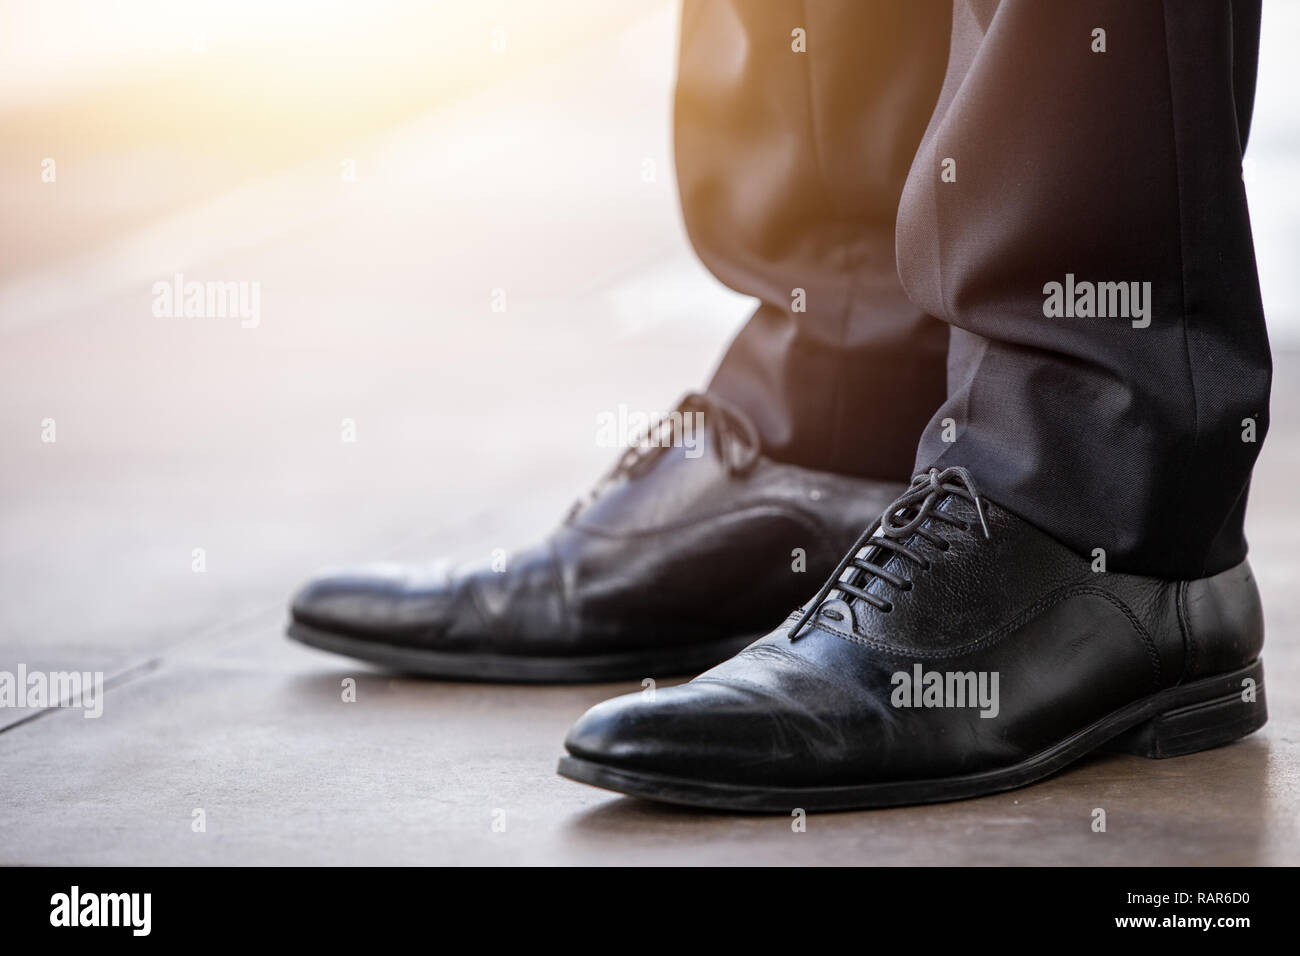 Businessman closeup leather shoes black color clean new shiny standing ready to walk. Stock Photo